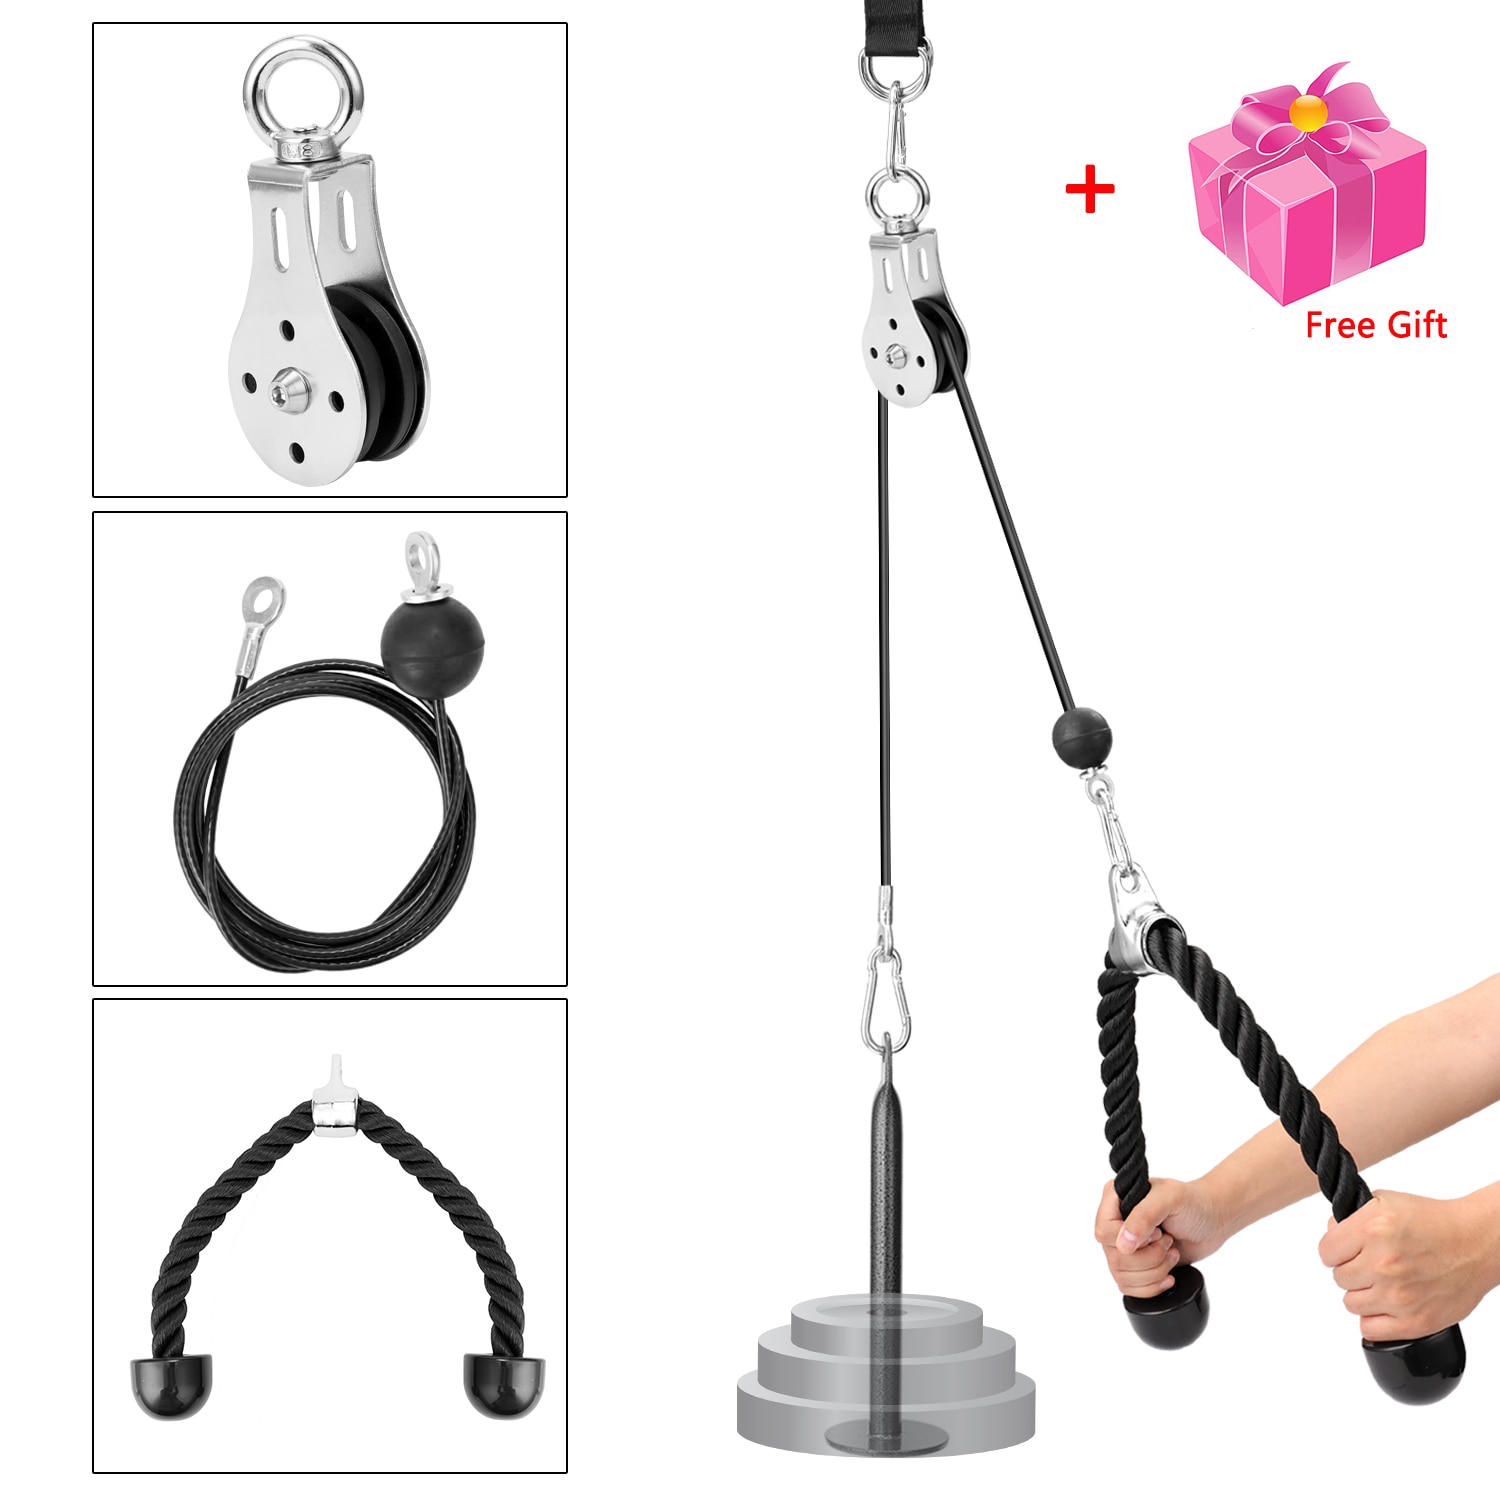 Gym Fitness DIY Pulley Cable Machine Attachments Pull Down Machine Full Set F1094 Back Muscle Biceps Triceps Blaster Trainer